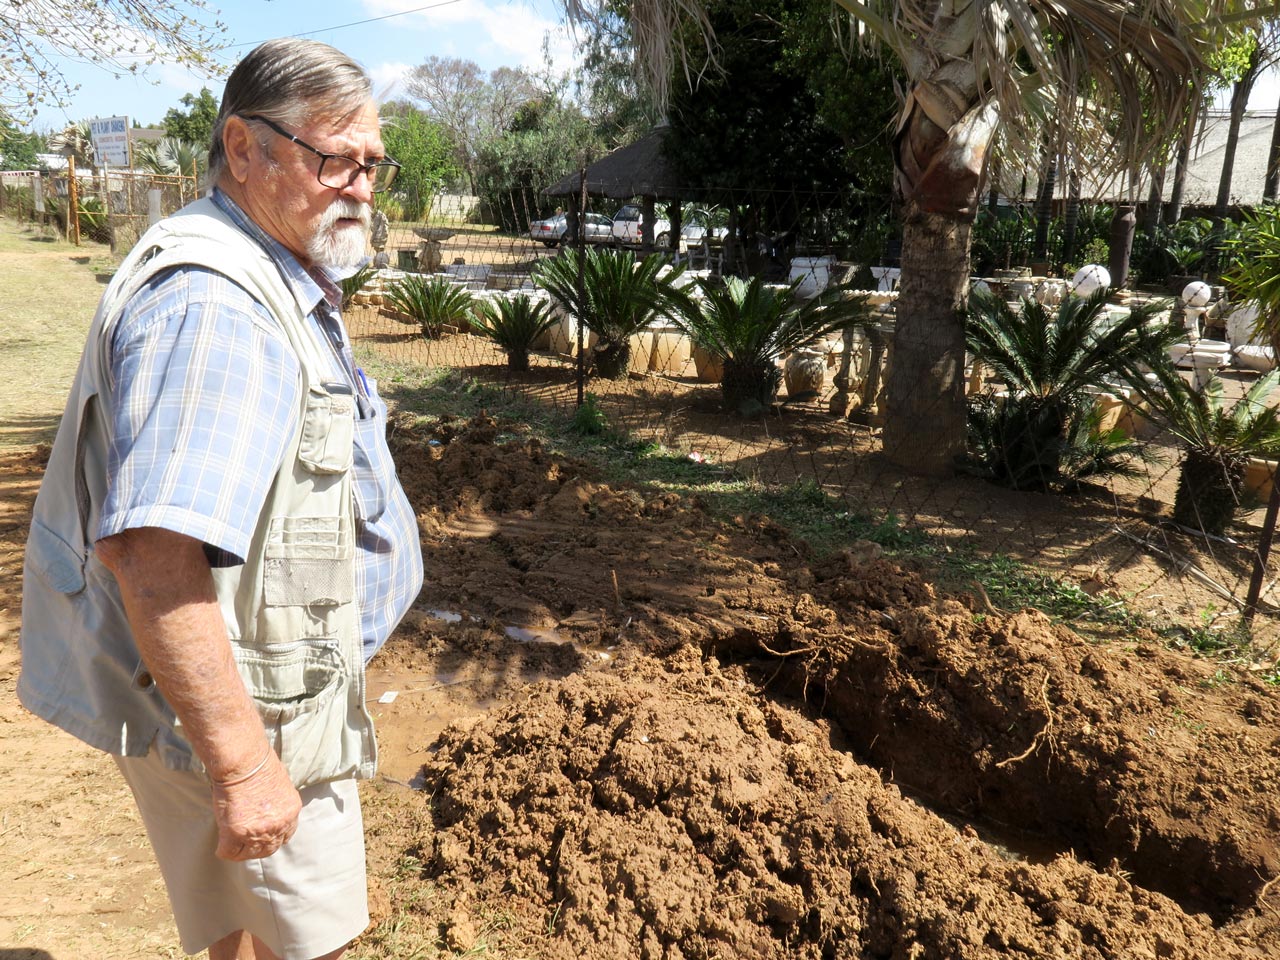 Emalahleni resident Hennie Beuke inspects a burst water pipe on the verge outside his property